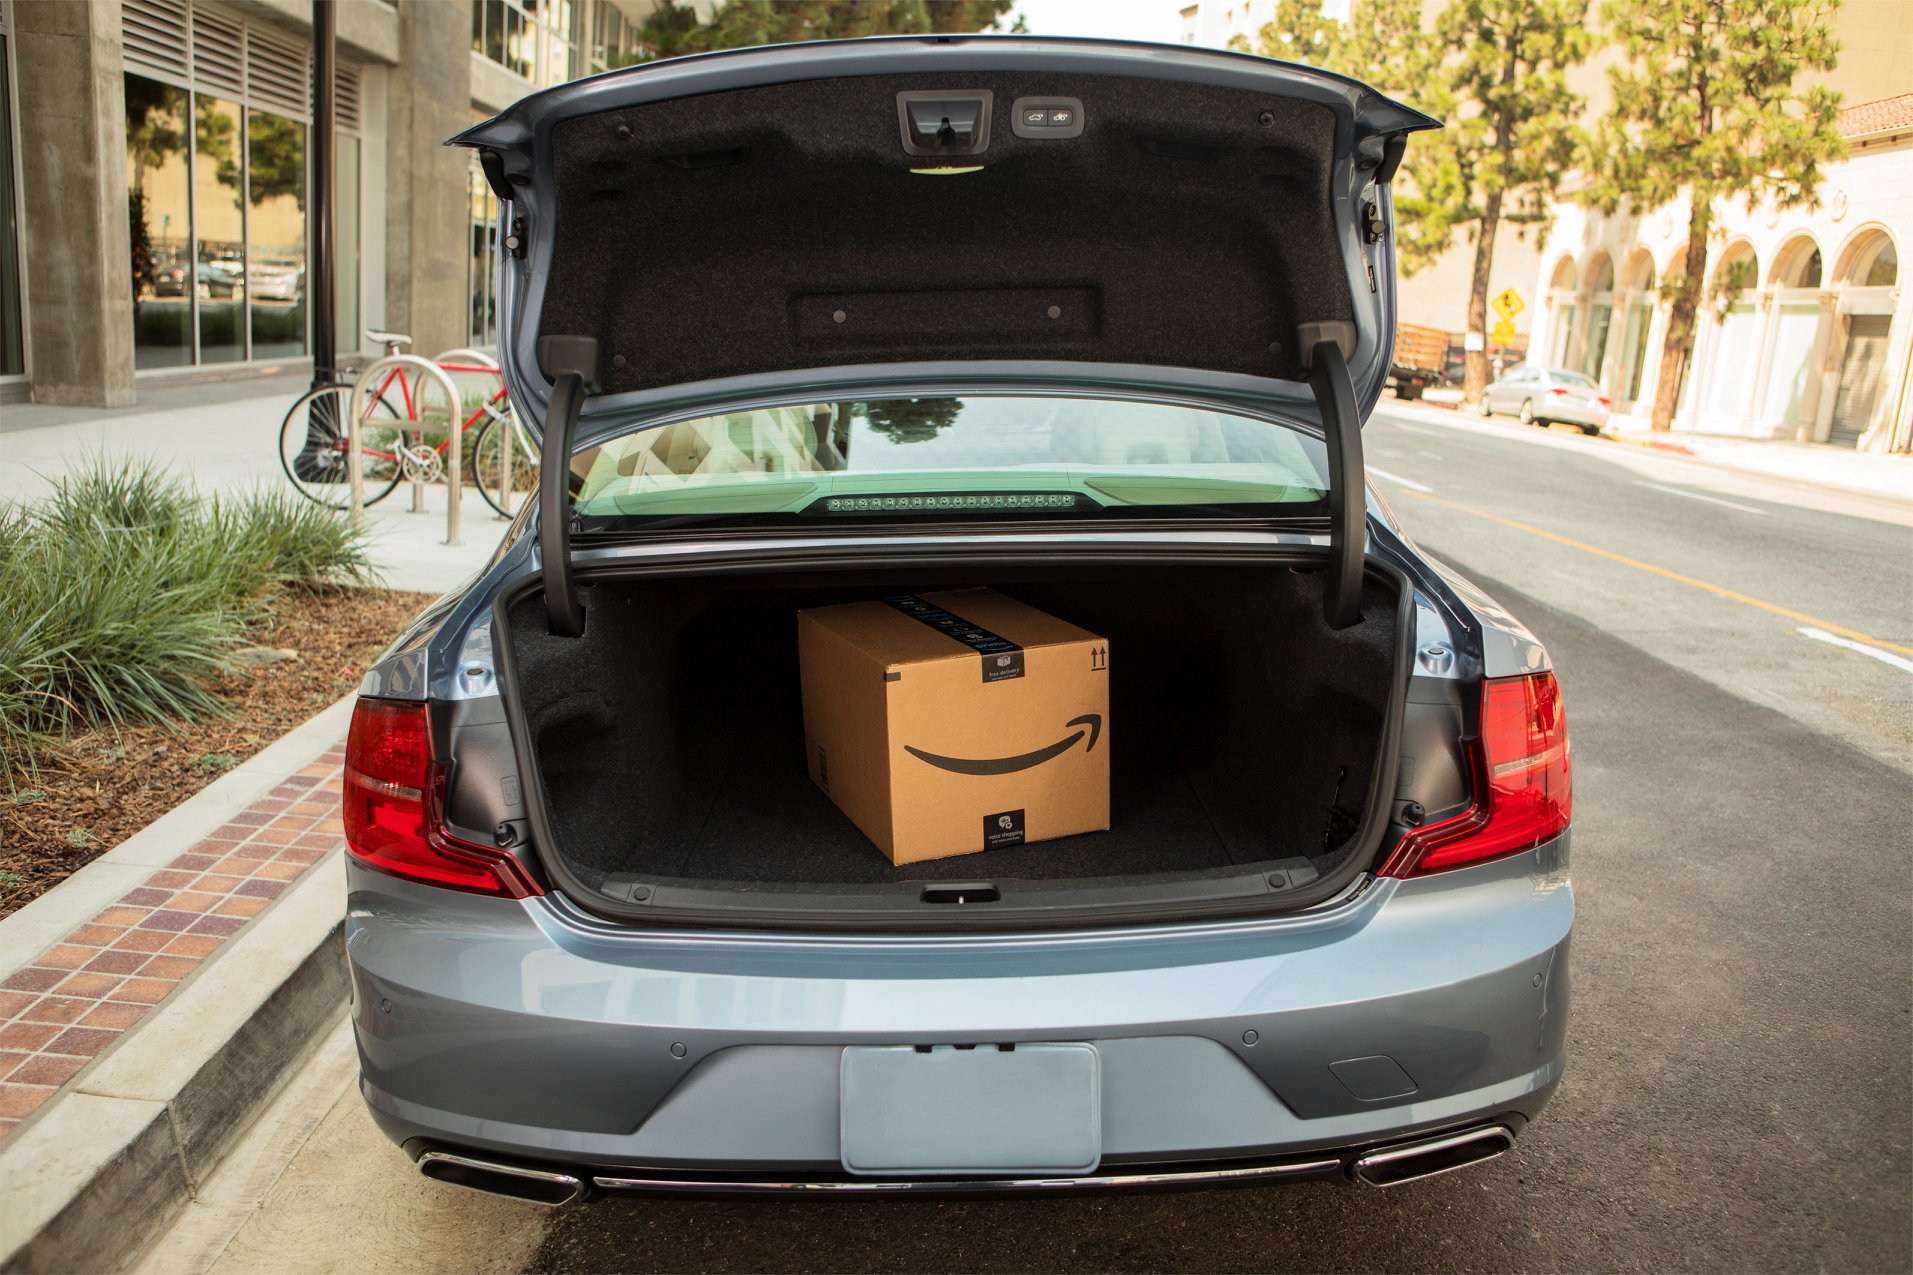 Amazon key in-car delivery, key in-car delivery, amazon key in-car, in-car delivery, amazon key, amazon car delivery, amazon delivery, package delivery to car, parcel delivery to car, amazon delivery options, package delivery, parcel delivery, amazon package delivery, amazon parcel delivery, car delivery, auto delivery